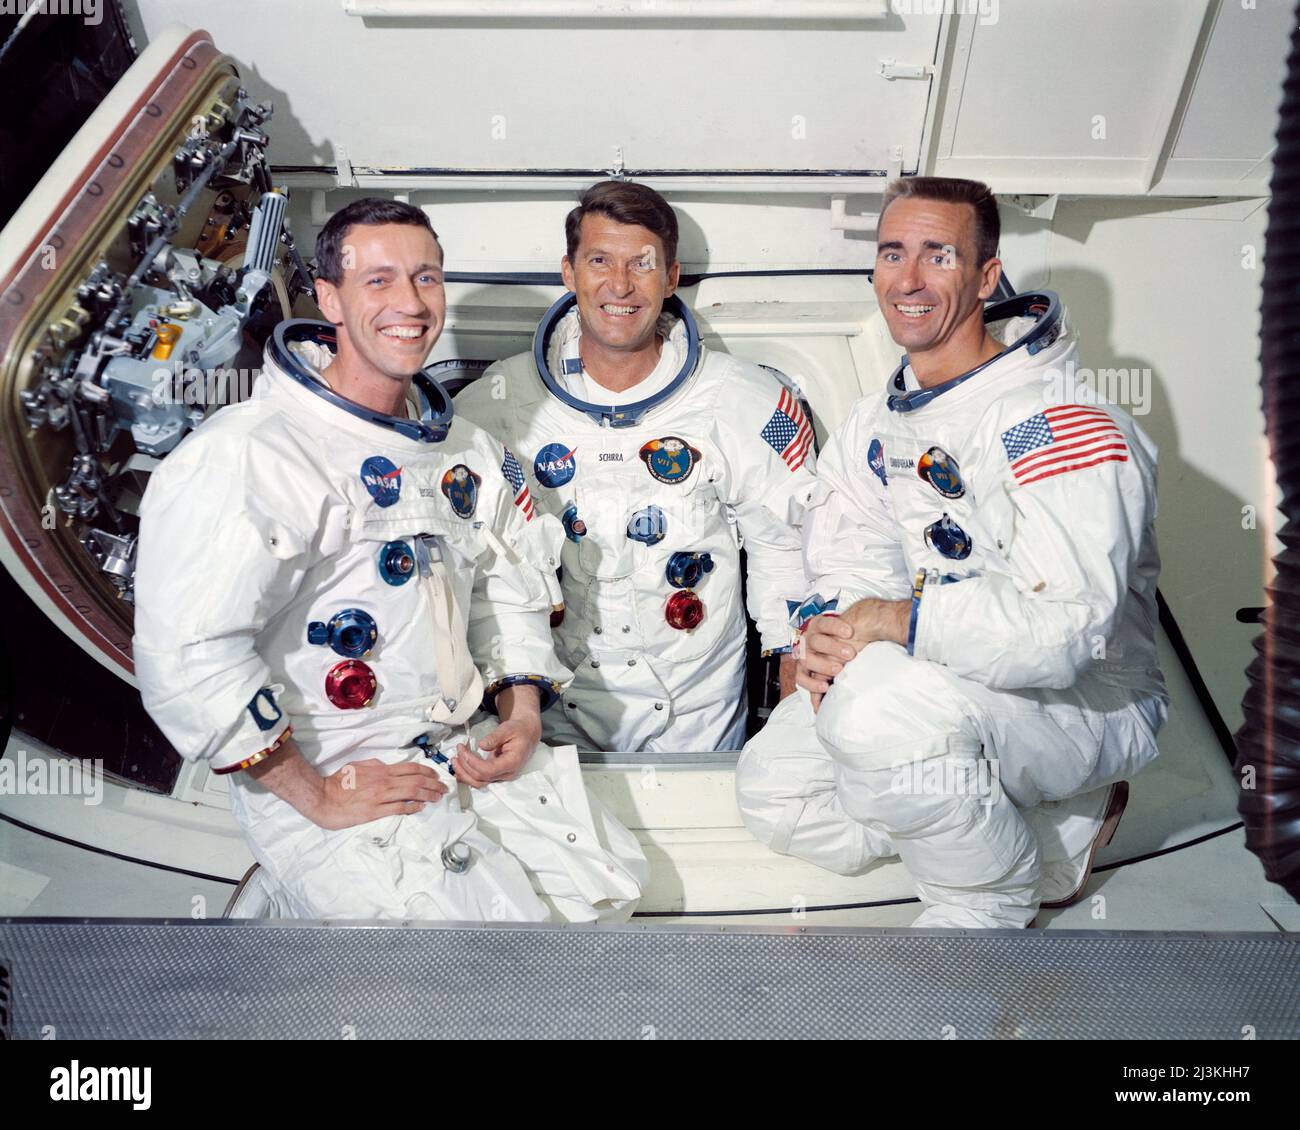 The prime crew of the first manned Apollo space mission, Apollo 7.  From left to right are: Command Module pilot, Don Eisele, Commander, Walter Schirra and Lunar Module pilot, Walter Cunningham. The photograph was taken inside the White Room which is attached to the crew access arm. From here astronauts get into the spacecraft. Stock Photo